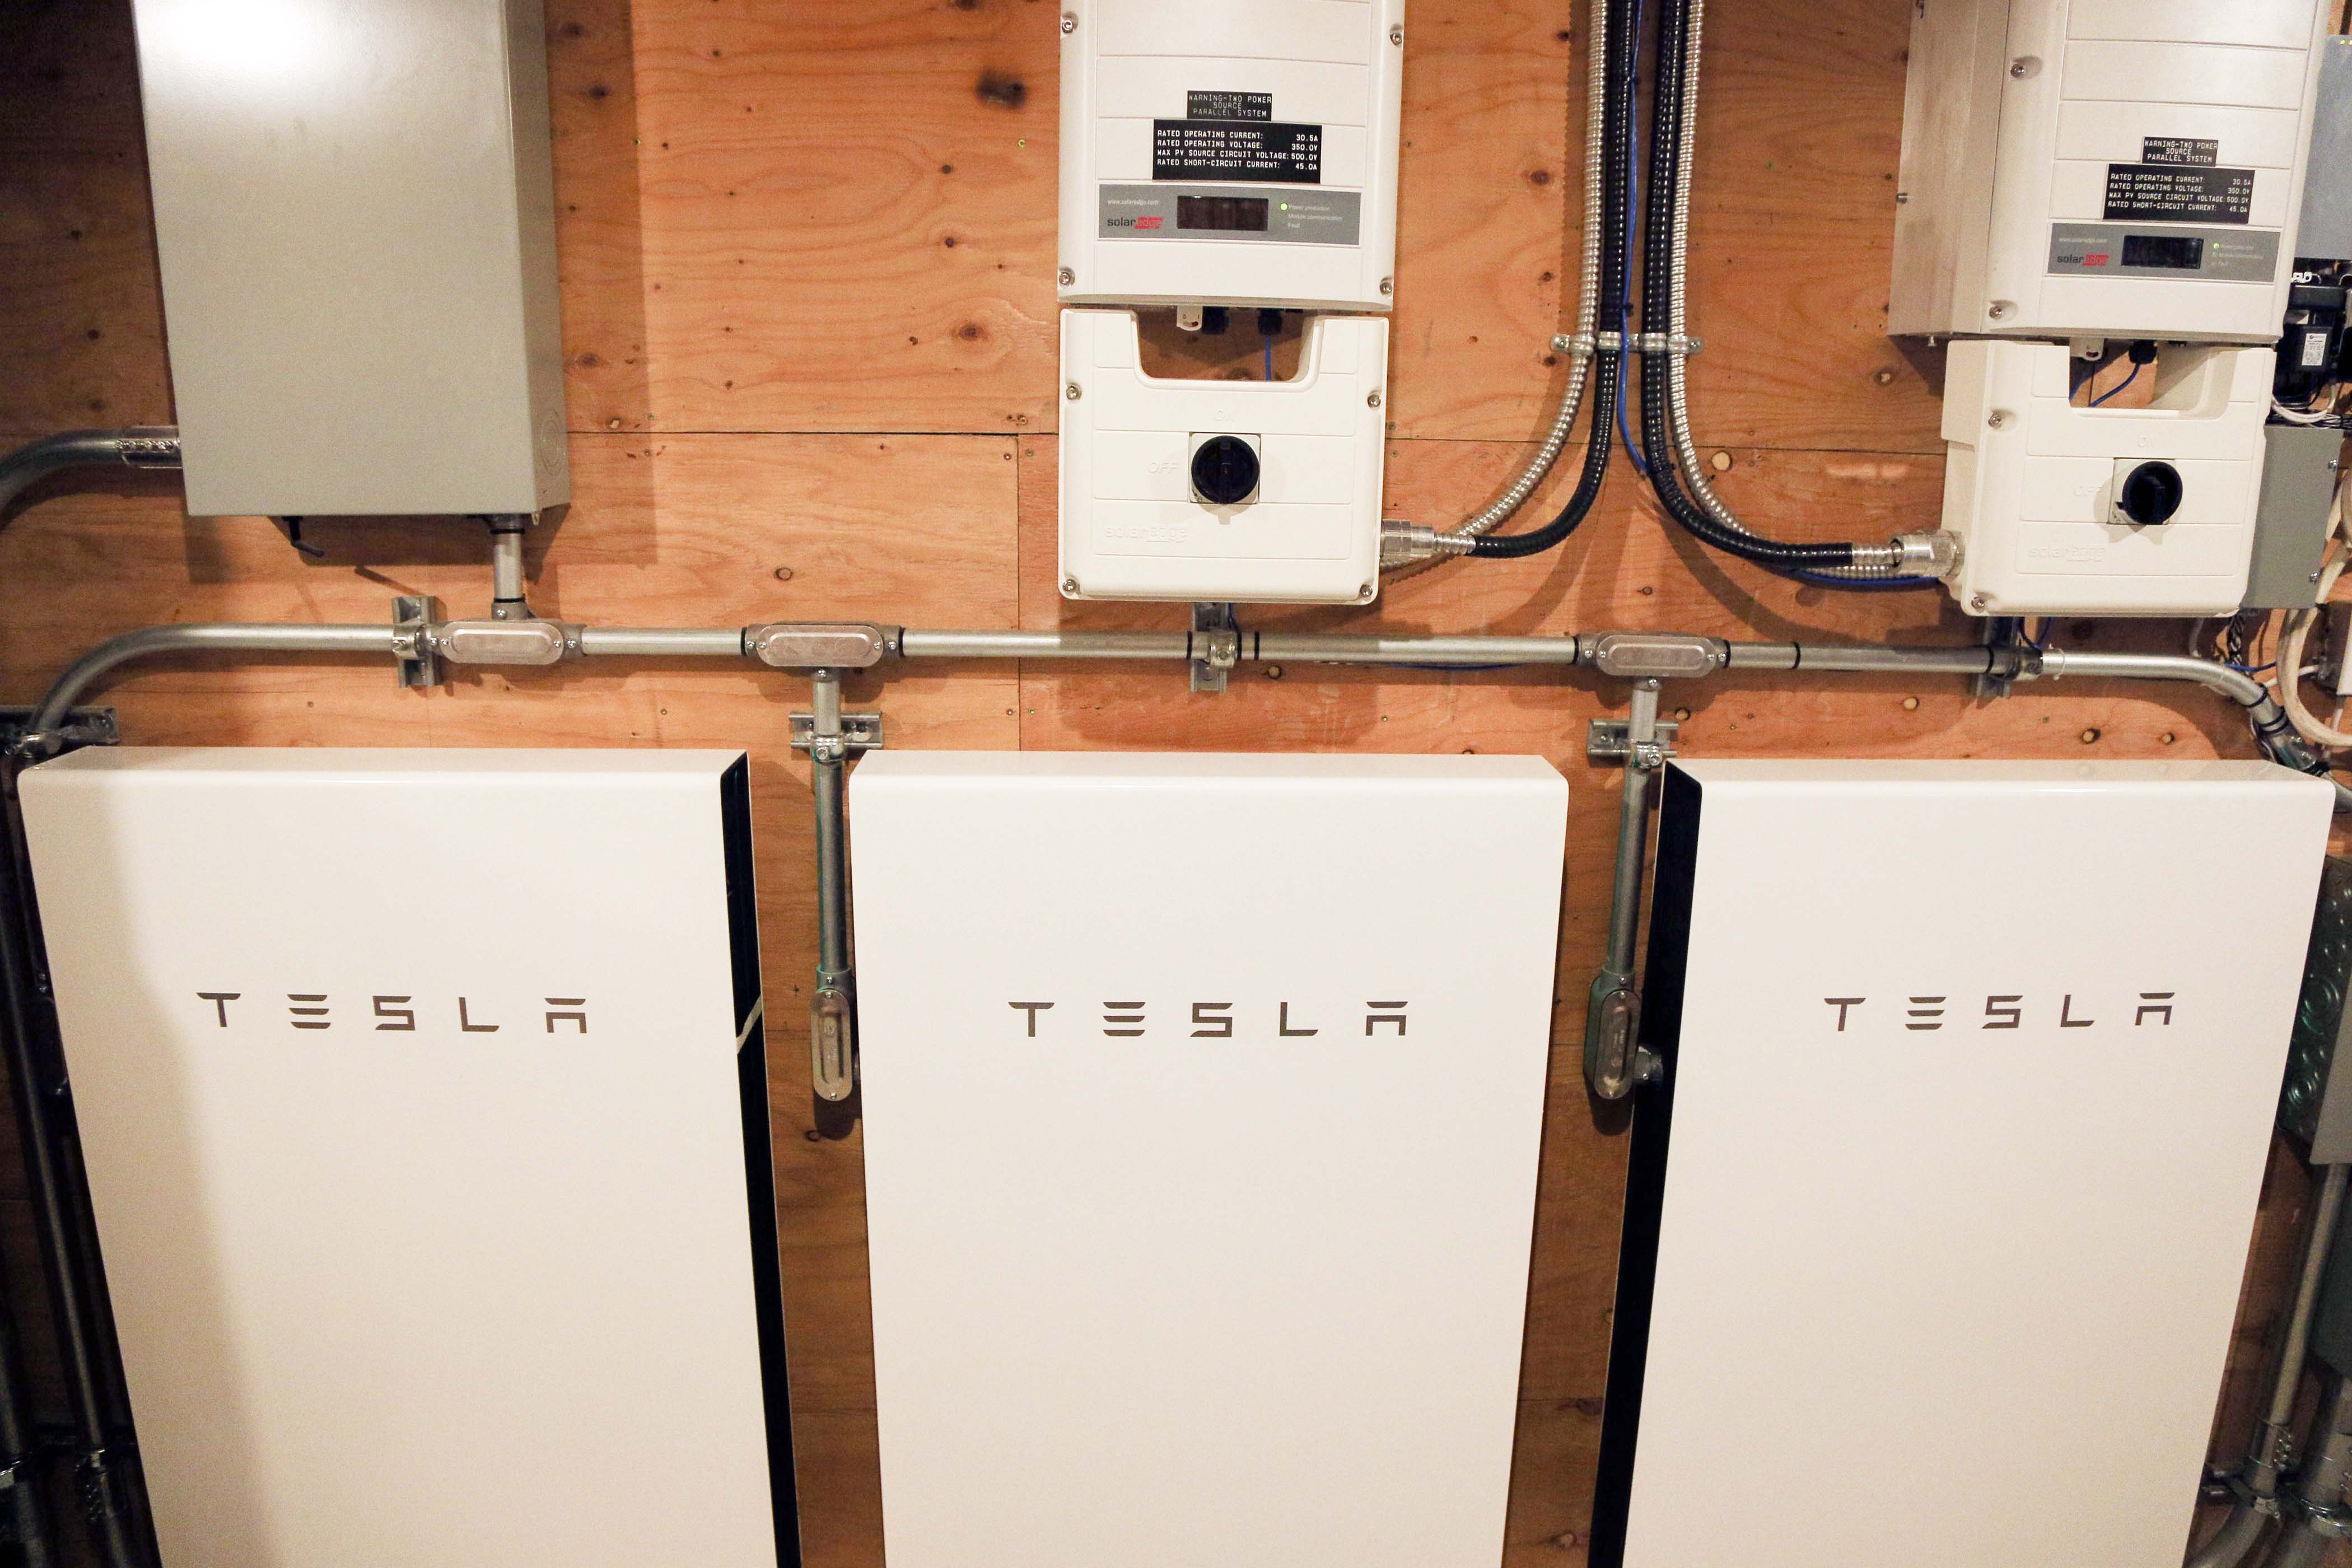 A bank of Tesla batteries on a wall in a home’s garage.